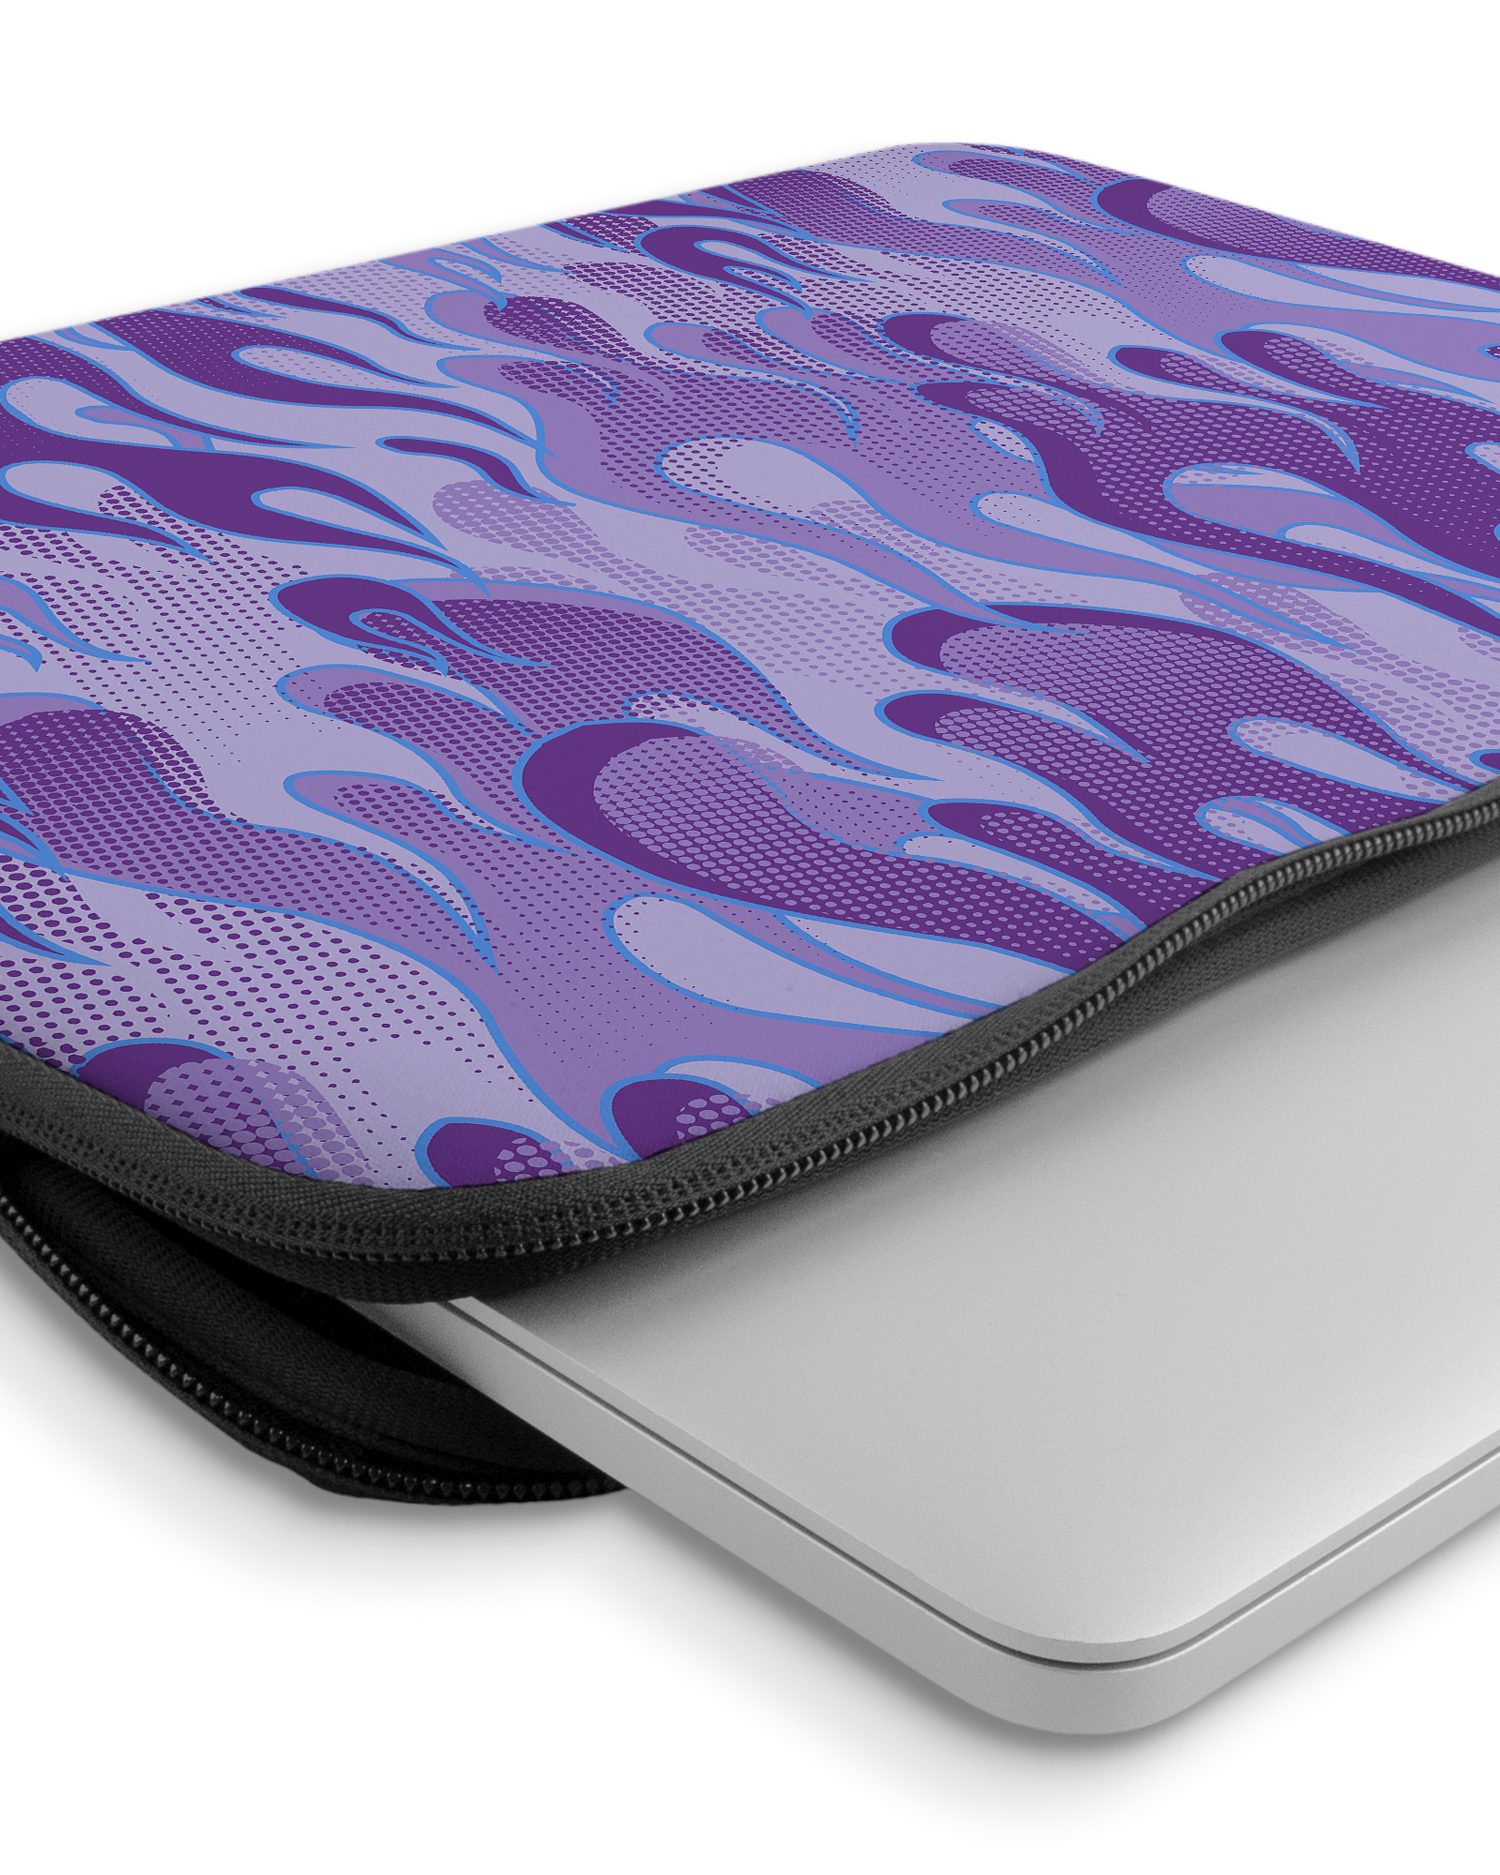 Purple Flames Laptop Case 14-15 inch with device inside